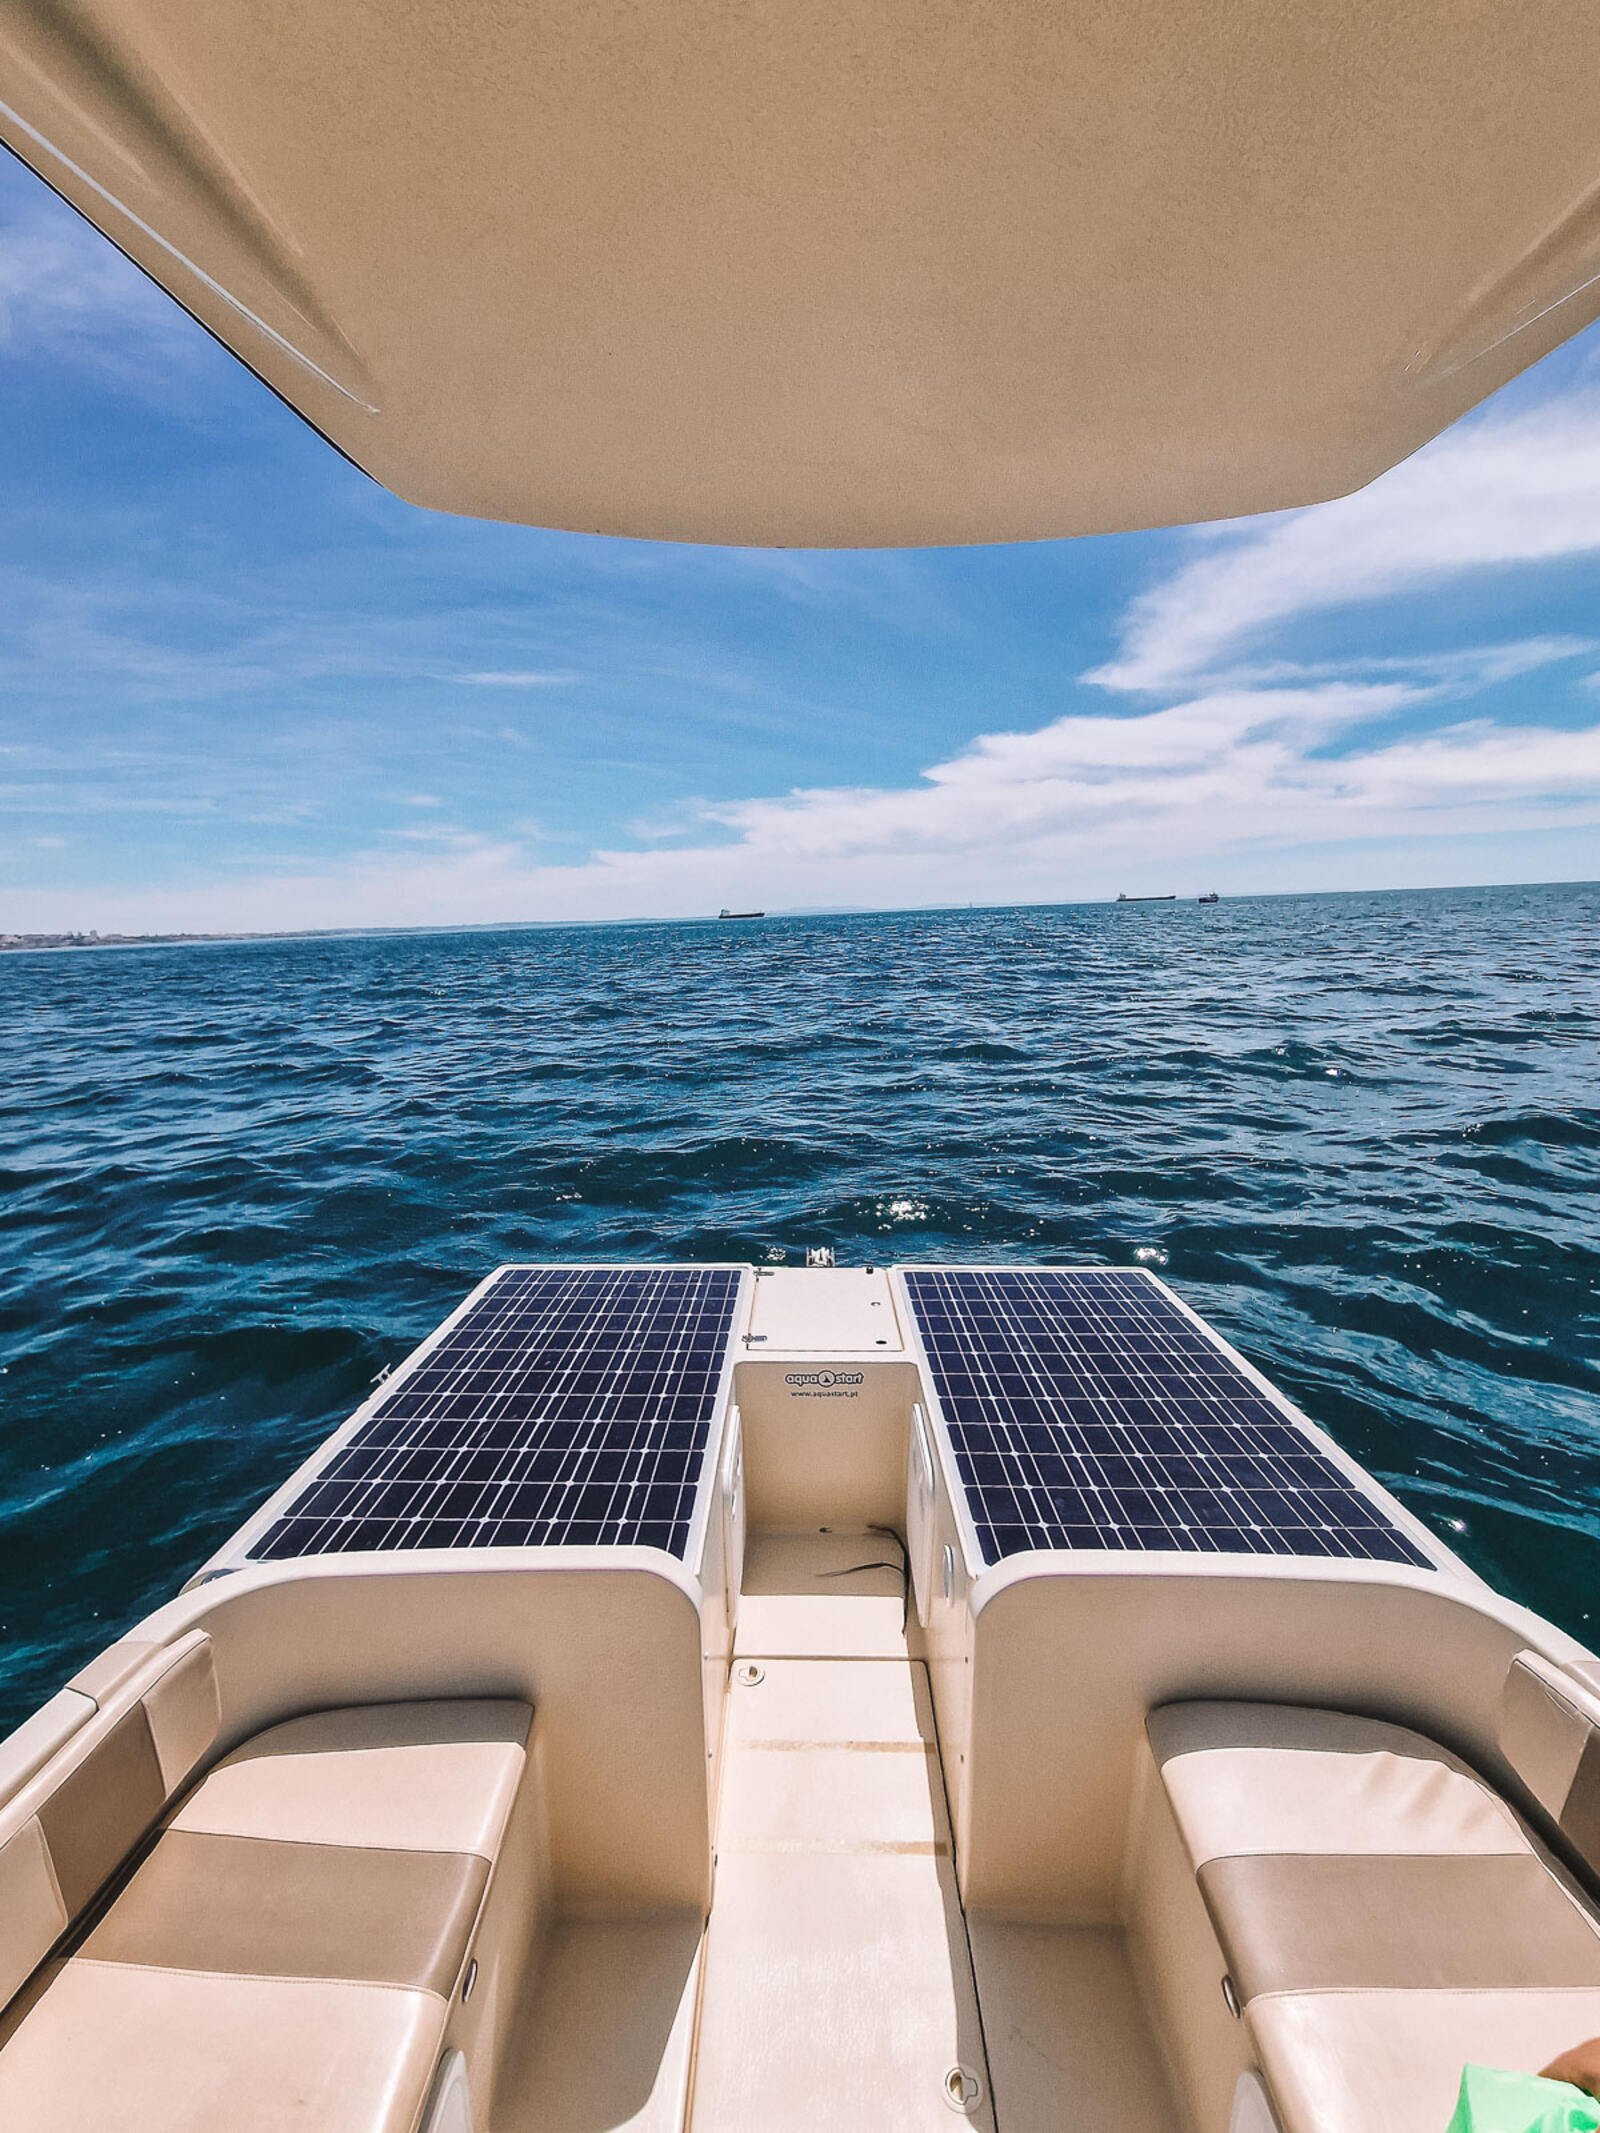 solar panels on a solar powered boat in the ocean